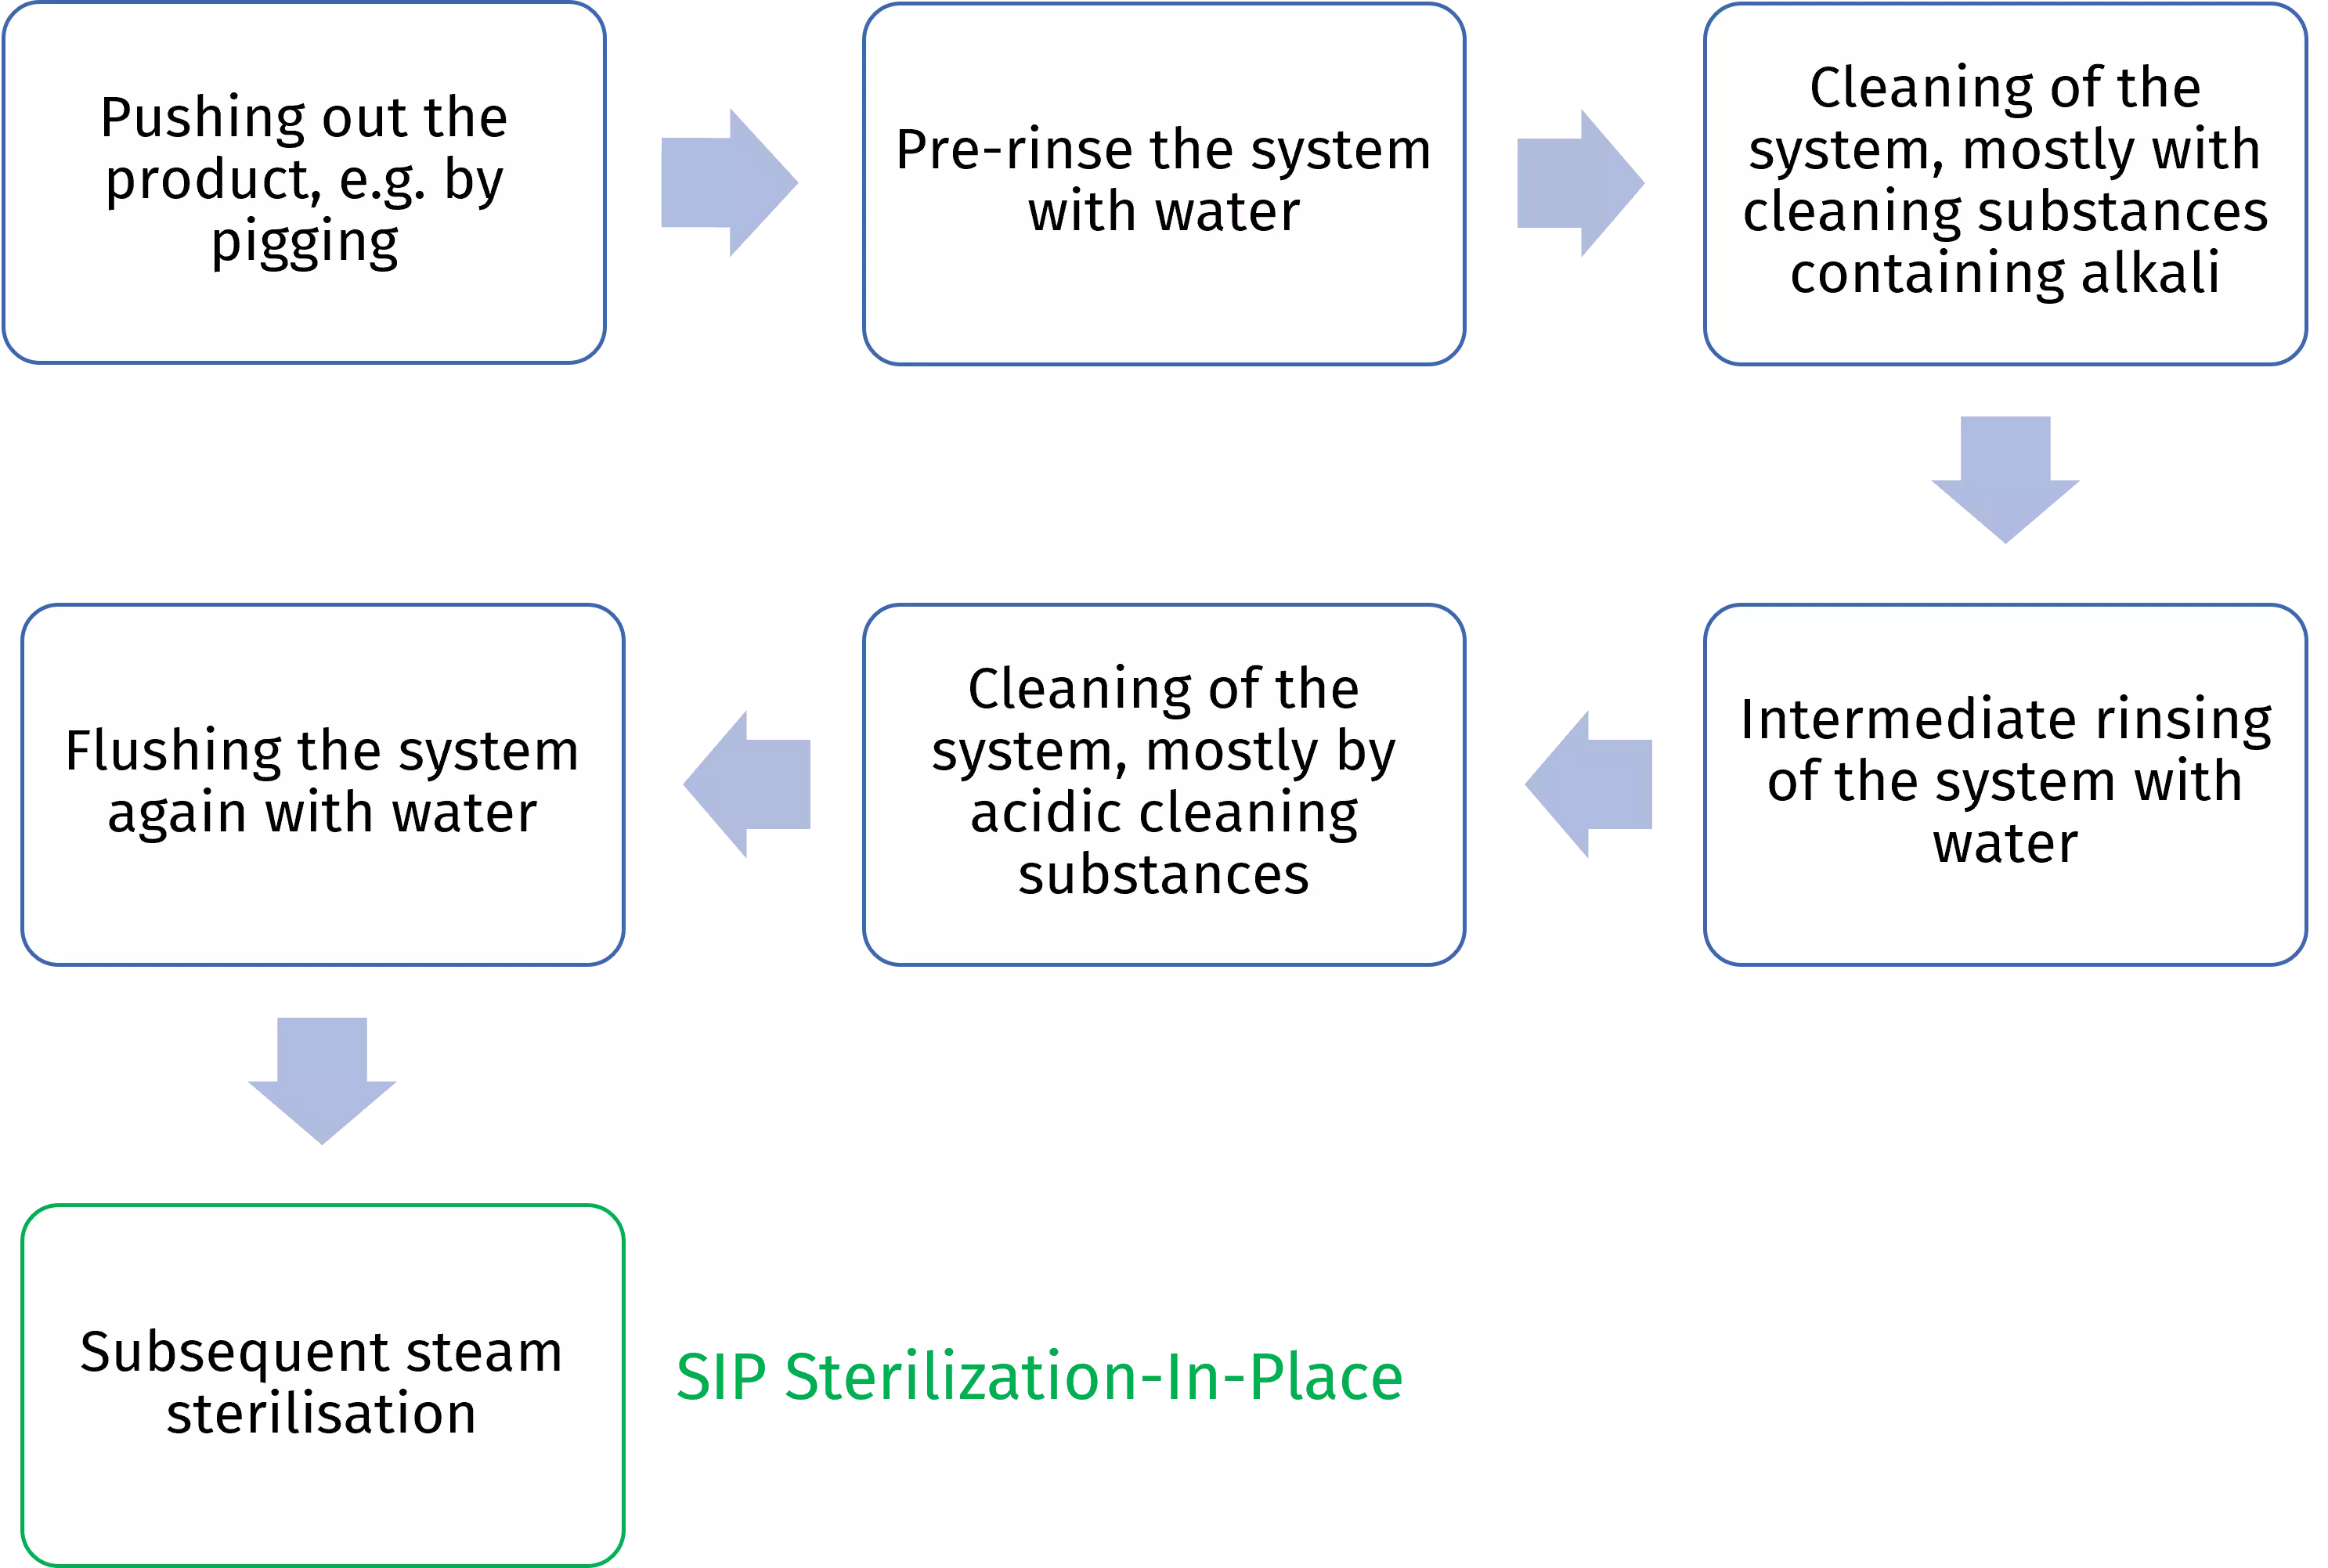 Flow chart showing the sequence of CIP cleaning with subsequent sterilisation SIP